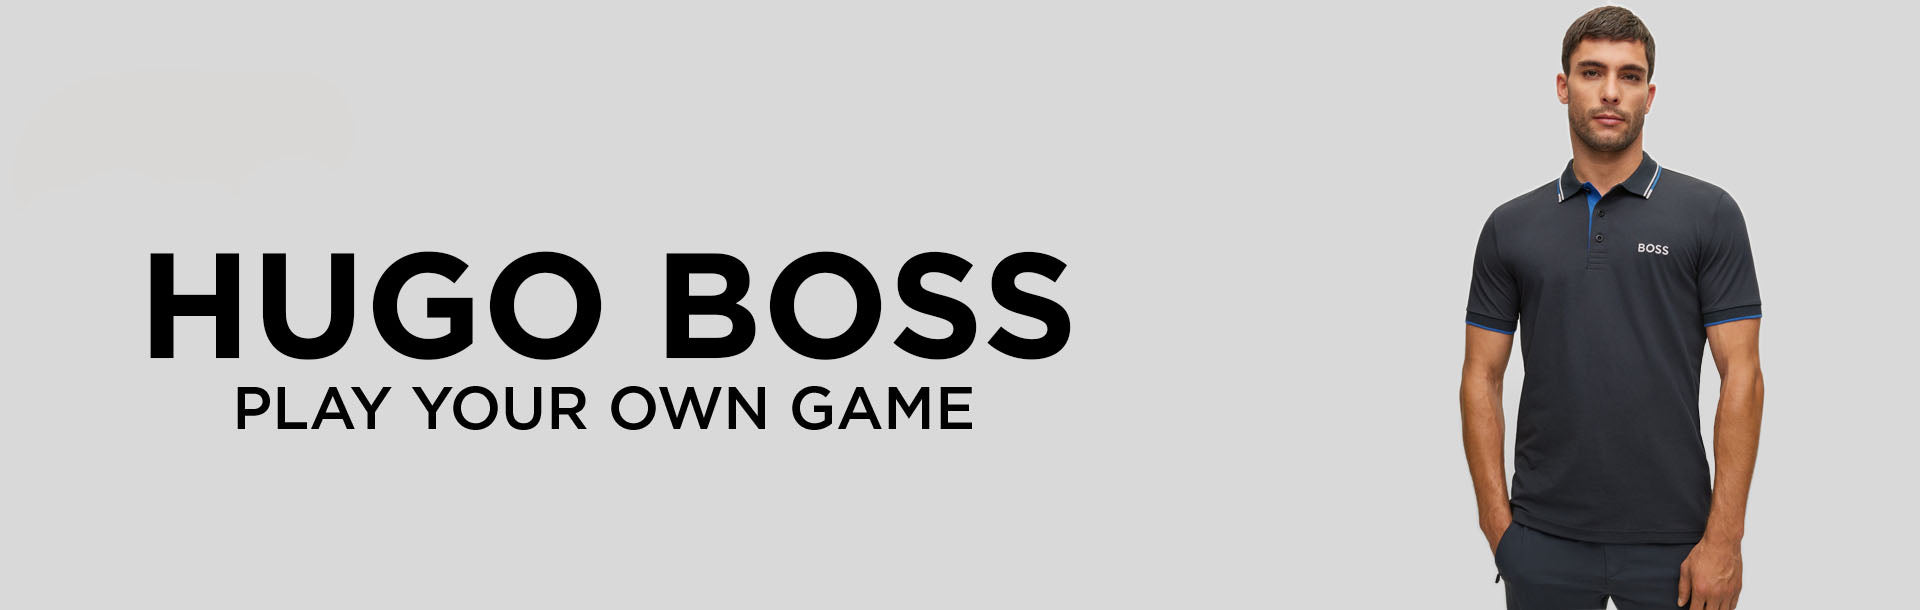 Dalset trappe Udled Boss By Hugo Boss Golf Clothing | The Golf Society